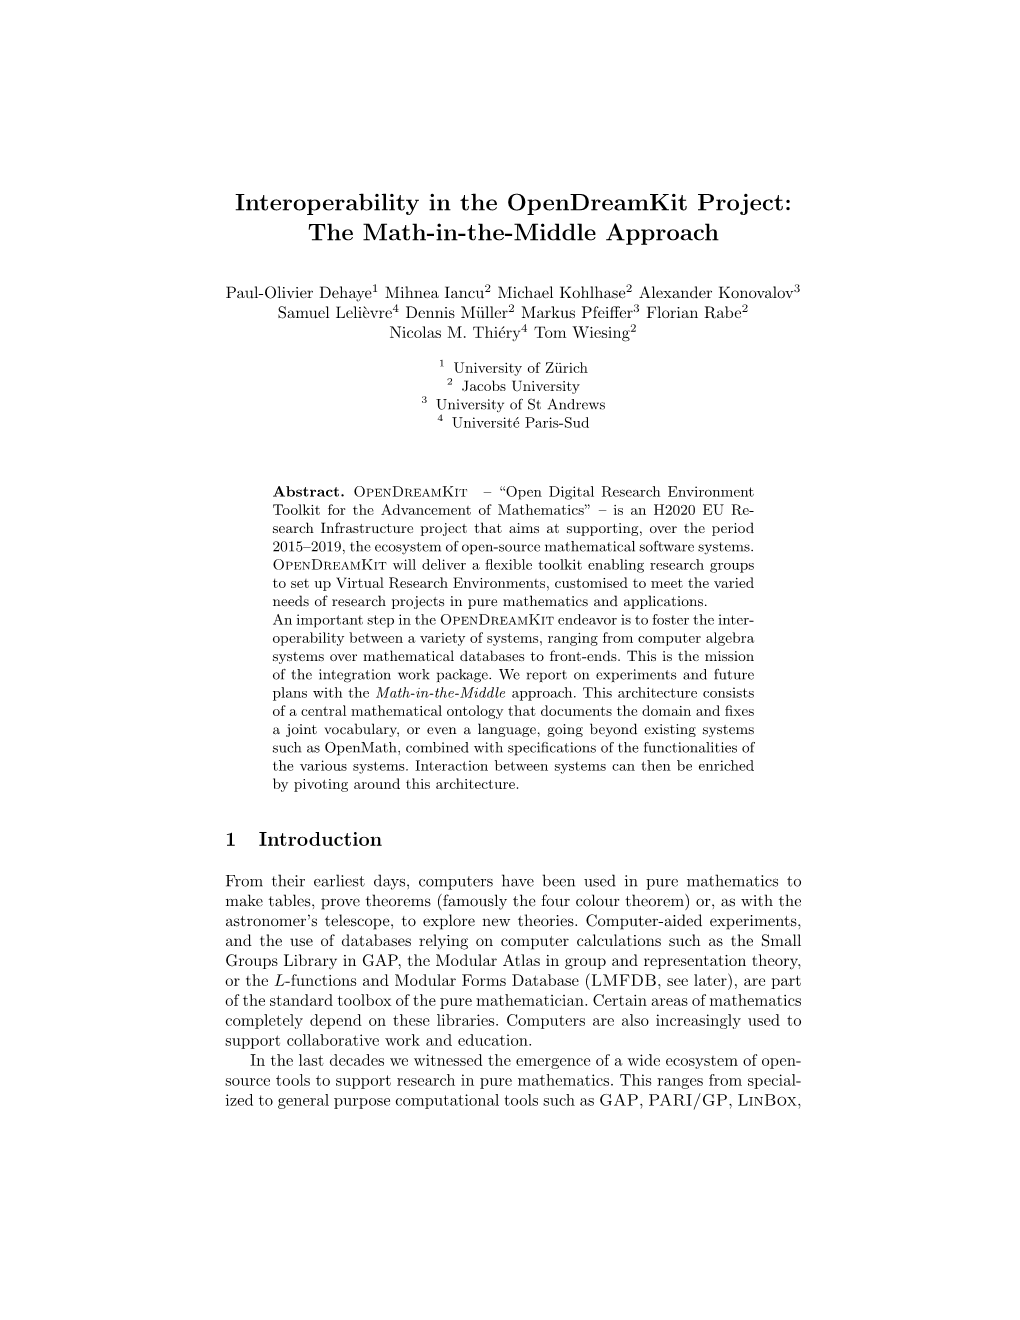 Interoperability in the Opendreamkit Project: the Math-In-The-Middle Approach